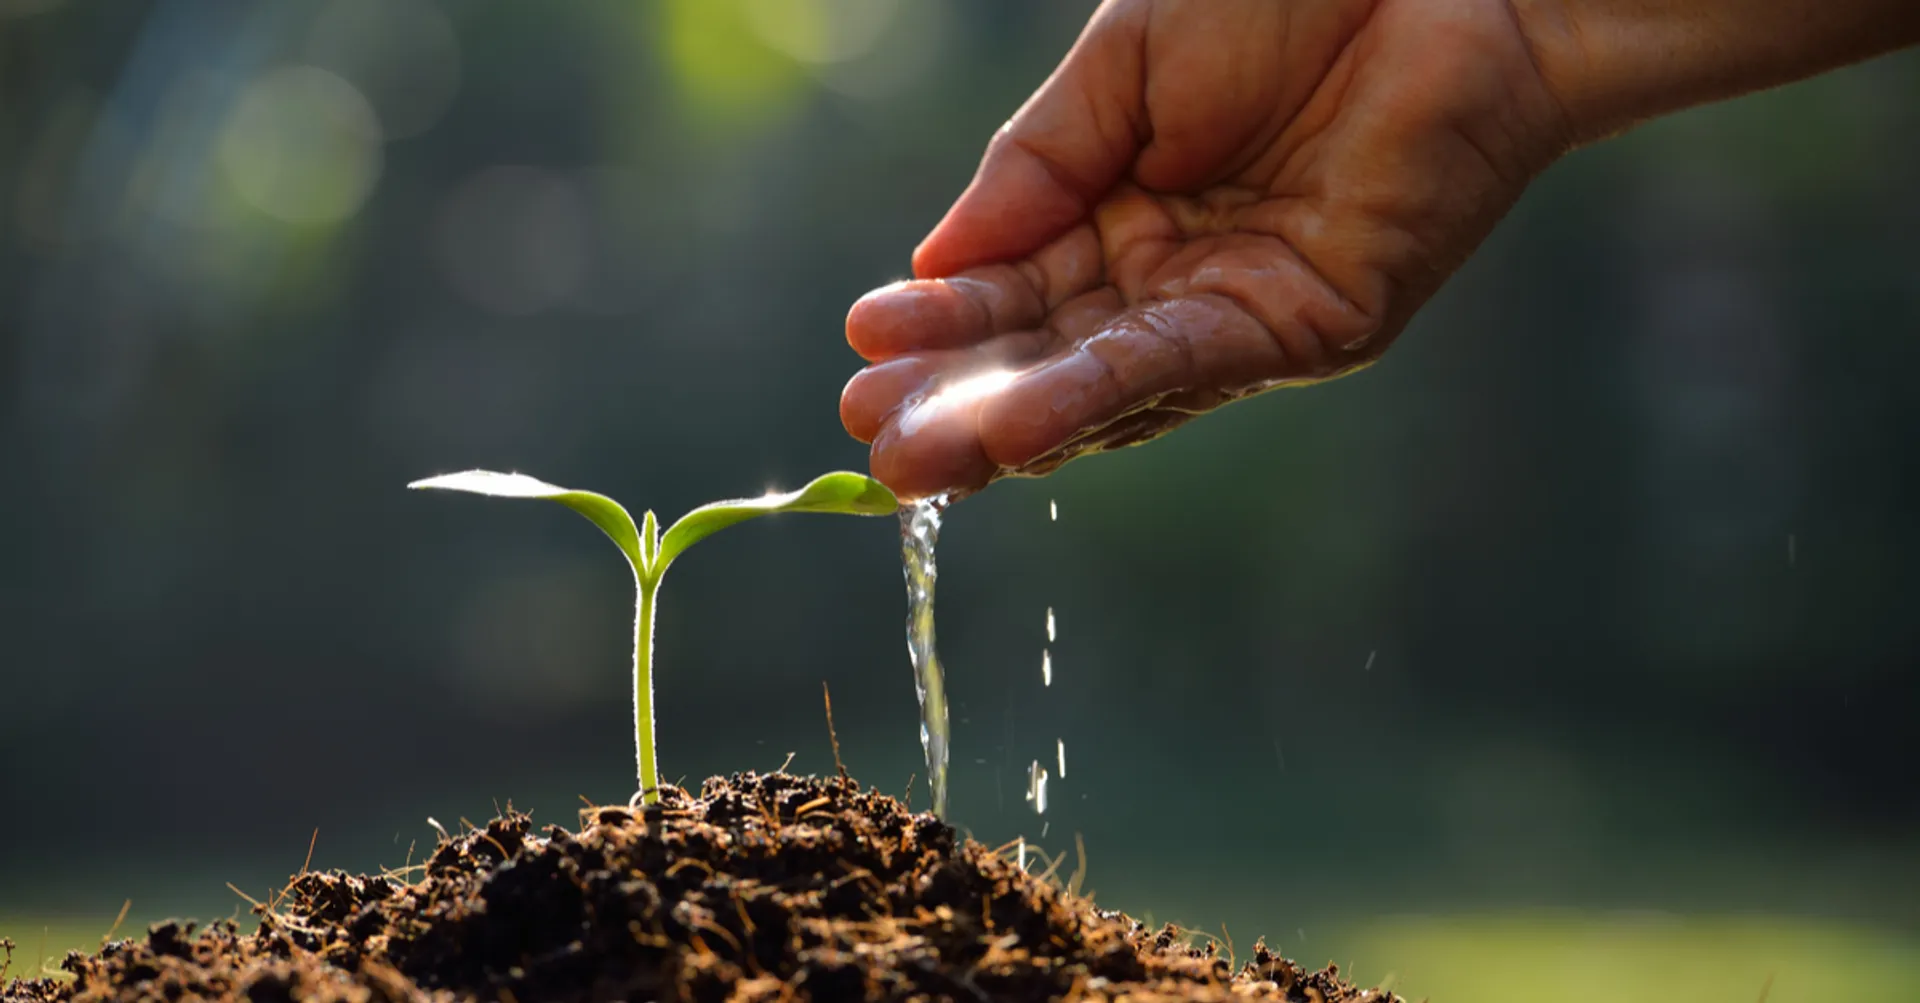 𝐋𝐞𝐚𝐝𝐞𝐫𝐬 𝐌𝐮𝐬𝐭 𝐅𝐨𝐬𝐭𝐞𝐫 𝐑𝐞𝐬𝐩𝐨𝐧𝐬𝐢𝐛𝐢𝐥𝐢𝐭𝐲
 
Planting responsibility is critical for growing a successful business. 
 
Encouraging high levels of responsibility in others can have a positive impact on productivity, performance, and creativity.
 
Cultivating responsibility in others may require founders to work in new and uncomfortable ways. Therefore, you must first embrace the long-term value.
 
 
𝗥𝗲𝘀𝗽𝗼𝗻𝘀𝗶𝗯𝗶𝗹𝗶𝘁𝘆 𝗙𝗮𝗹𝗹𝘀 𝗼𝗻 𝗬𝗼𝘂
 
Here are some tips to help you inspire responsibility:
 
𝘓𝘦𝘢𝘥 𝘣𝘺 𝘦𝘹𝘢𝘮𝘱𝘭𝘦: As a founder, stakeholders look to see how you behave.
 
When something goes wrong, accept accountability, and then explain how you will solve the problem and avoid it from happening again.
 
"𝙇𝙚𝙖𝙙𝙚𝙧𝙨𝙝𝙞𝙥 [𝙞𝙨] 𝙩𝙖𝙠𝙞𝙣𝙜 𝙧𝙚𝙨𝙥𝙤𝙣𝙨𝙞𝙗𝙞𝙡𝙞𝙩𝙮 𝙛𝙤𝙧 𝙚𝙫𝙚𝙧𝙮𝙩𝙝𝙞𝙣𝙜 𝙩𝙝𝙖𝙩 𝙜𝙤𝙚𝙨 𝙬𝙧𝙤𝙣𝙜 𝙖𝙣𝙙 𝙜𝙞𝙫𝙞𝙣𝙜 𝙮𝙤𝙪𝙧 𝙨𝙪𝙗𝙤𝙧𝙙𝙞𝙣𝙖𝙩𝙚𝙨 𝙘𝙧𝙚𝙙𝙞𝙩 𝙛𝙤𝙧 𝙚𝙫𝙚𝙧𝙮𝙩𝙝𝙞𝙣𝙜 𝙩𝙝𝙖𝙩 𝙜𝙤𝙚𝙨 𝙬𝙚𝙡𝙡.” 
– Dwight D. Eisenhower
 
 
𝘋𝘦𝘭𝘦𝘨𝘢𝘵𝘦 𝘭𝘦𝘢𝘥𝘦𝘳𝘴𝘩𝘪𝘱: Empower team members to make decisions. 
 
This approach may be tougher for founders who built a company from scratch by micromanaging many aspects of the business.
 
You have to weigh the tradeoffs. Delegating ownership will facilitate growth and allow you to focus on cutting-edge product and business strategies.
 
To delegate effectively, emphasize outcomes over process. Ask for regular updates on progress, obstacles, and metrics, but don't take back control.
 
 
𝘌𝘯𝘤𝘰𝘶𝘳𝘢𝘨𝘦 𝘢𝘶𝘵𝘰𝘯𝘰𝘮𝘺: Share expectations for their role, set measurable objectives, and provide regular feedback.
 
For every person, connect performance to team and company success.
 
Finally, emphasize metrics across the board. Openly sharing recurring updates and reports fosters collaboration and accountability.
 
 
𝘍𝘰𝘴𝘵𝘦𝘳 𝘨𝘳𝘰𝘸𝘵𝘩: Just like you, others have motivations to perform well. Allow others to fuel their ambition as it aligns with your goals.
 
Allow employees to enhance their skills and knowledge related to their work e.g. training, networking, and mentorship.
 
Acknowledge employees who demonstrate responsibility to reinforce desired activities. This appreciation should be done both privately and publicly.
 
 
𝘒𝘯𝘰𝘸 𝘠𝘰𝘶𝘳𝘴𝘦𝘭𝘧: Some founders expect perfection and are tough on themselves while ignoring accomplishments.
 
While this approach may work for you, most people require more recognition and leeway.
 
Consider how you can emphasize positive recognition while tempering negative feedback. While it's crucial to be candid, it's equally important to have the intention of building up others and encouraging greater responsibility.
 
 
To inspire responsibility in others, you may need to operate differently. However, you will create exponential benefits for yourself and others.

________________________________________

Our latest newsletter talks about growth and balance in “Am I the Obstacle?” and “You’re Doing Fine” https://bit.ly/47iGQMA 

𝗦𝗰𝗮𝗹𝗲: 𝗥𝗲𝗮𝗰𝗵 𝗬𝗼𝘂𝗿 𝗣𝗲𝗮𝗸 is a modular handbook with over 130 articles that ascend into topics like leadership, growth, sales, marketing, operations, finance, and teams. In just five minutes, learn the best methods and practical solutions to help you reach your dreams. https://smile.amazon.com/dp/B0BP9GVRPY

Contact info@webuildscalegrow.com to receive a free copy of the article "Facing Your Fears Is Powerful".